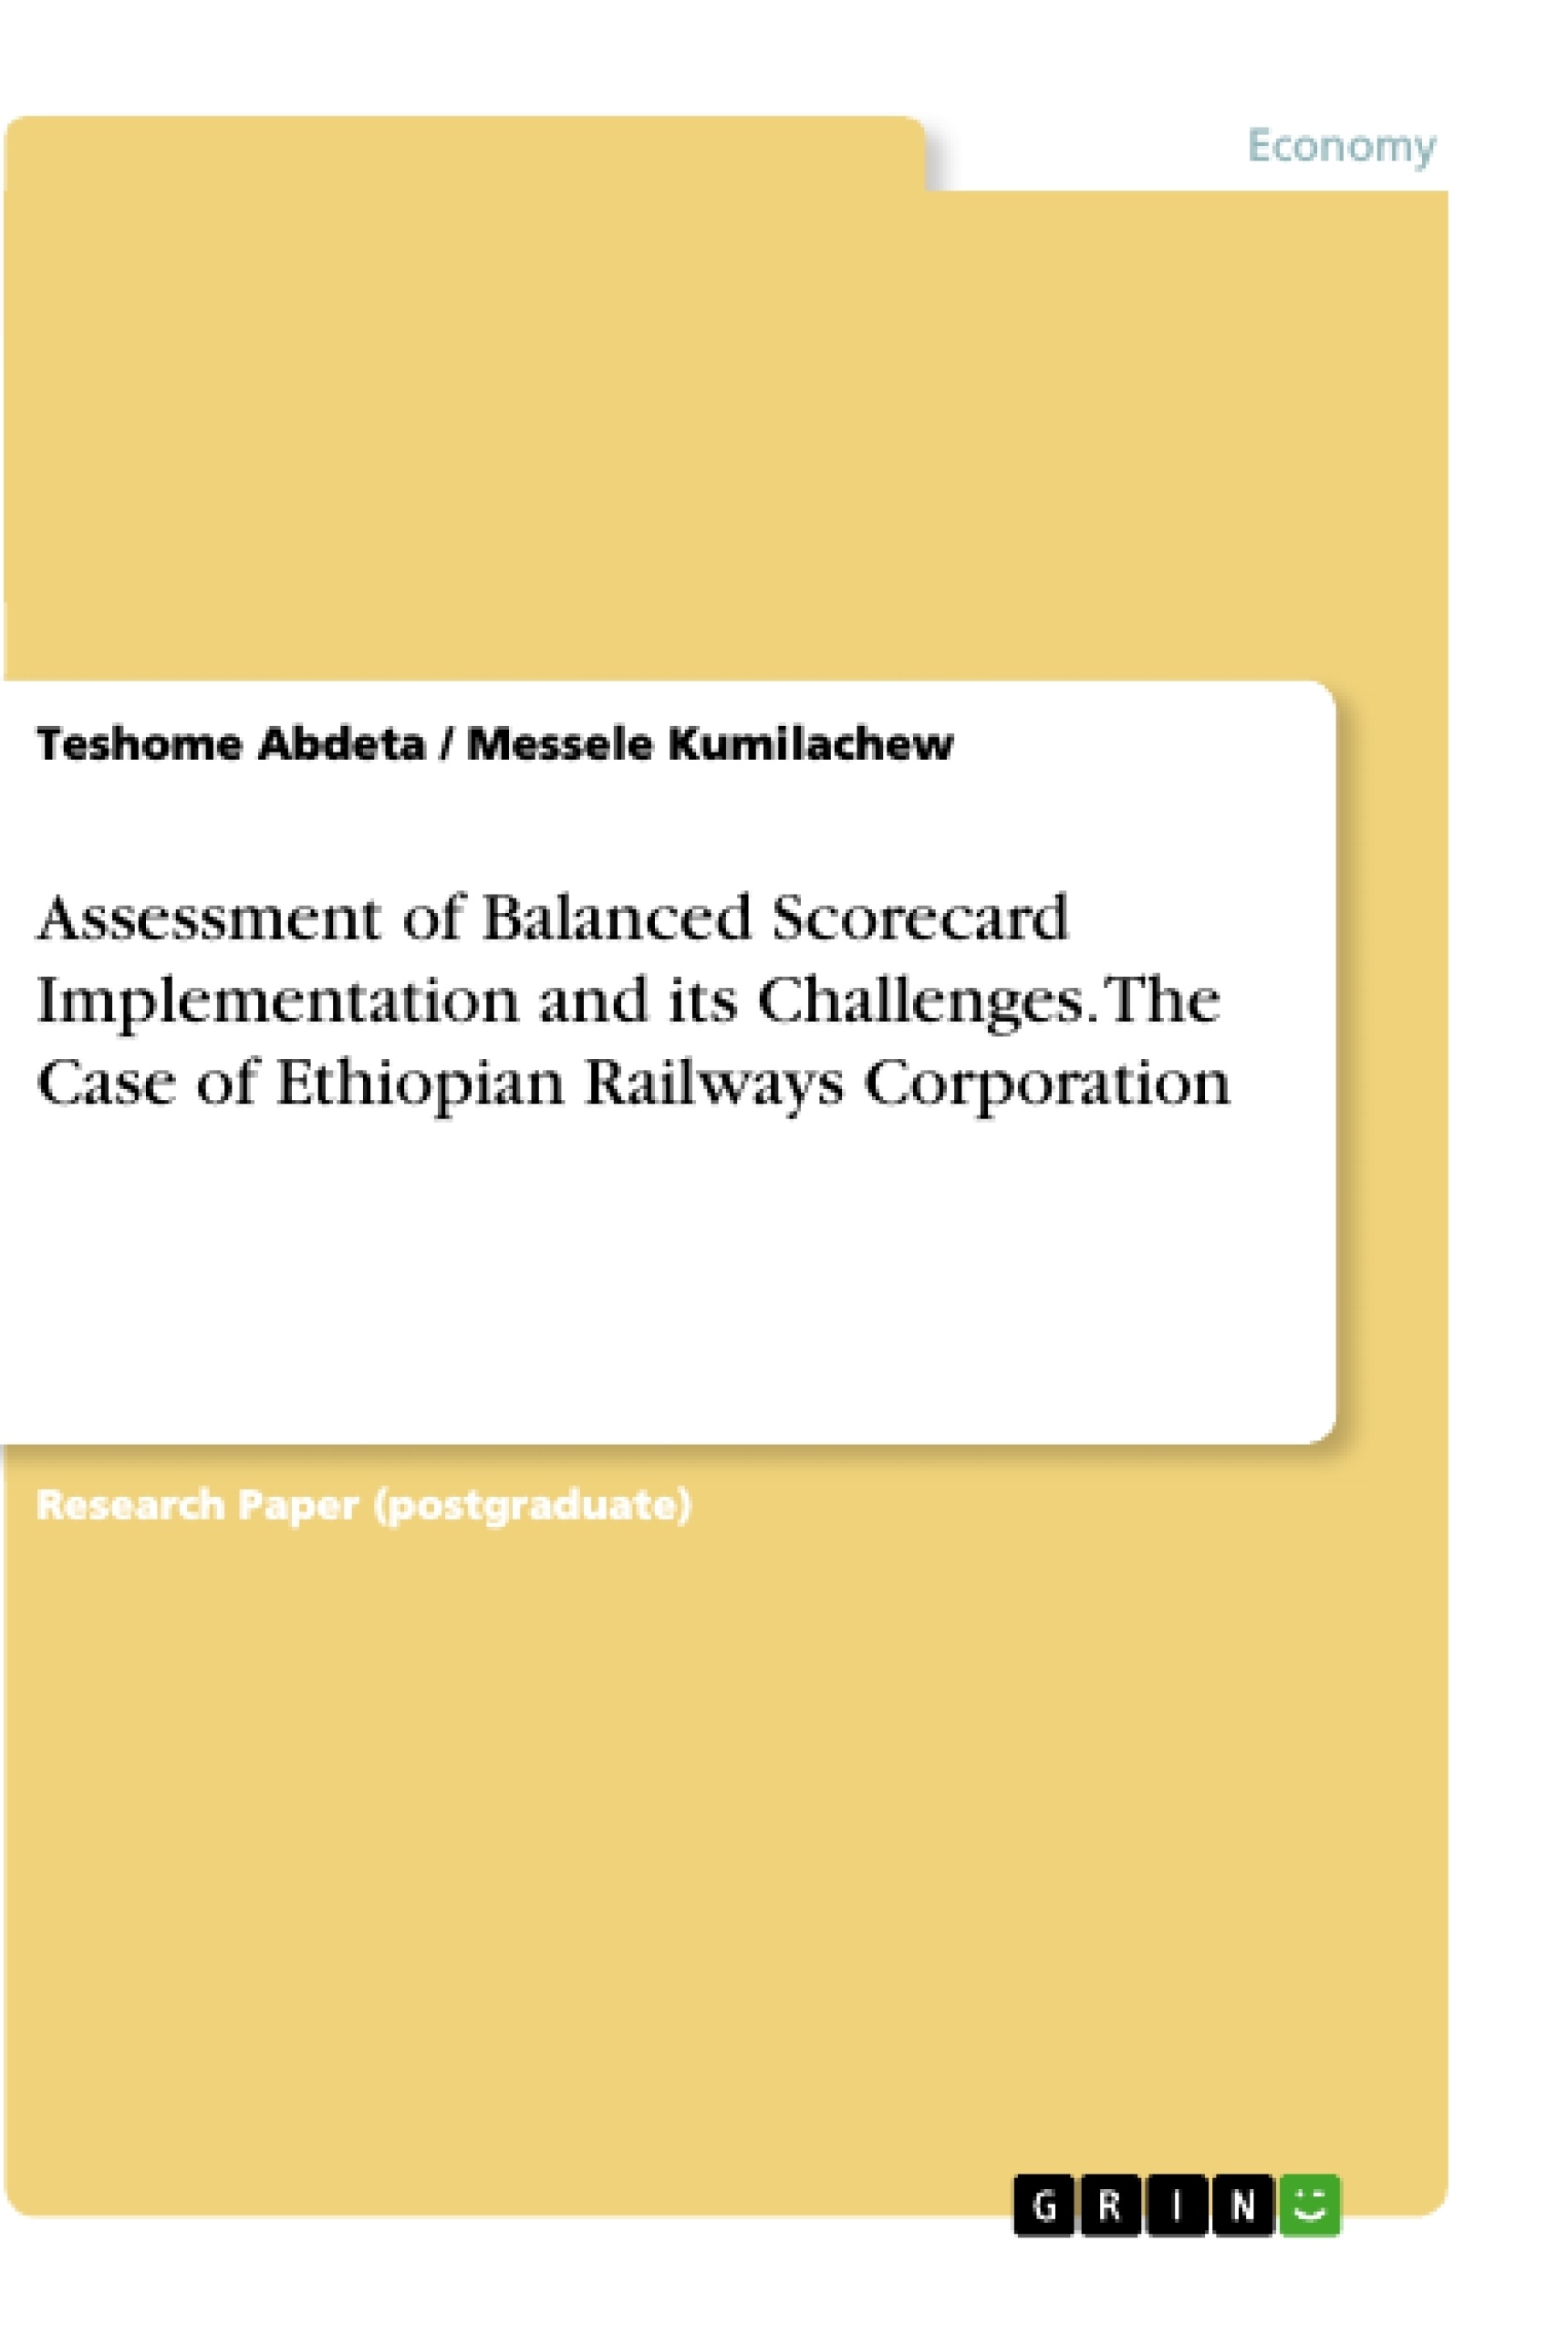 Titre: Assessment of Balanced Scorecard Implementation and its Challenges. The Case of Ethiopian Railways Corporation